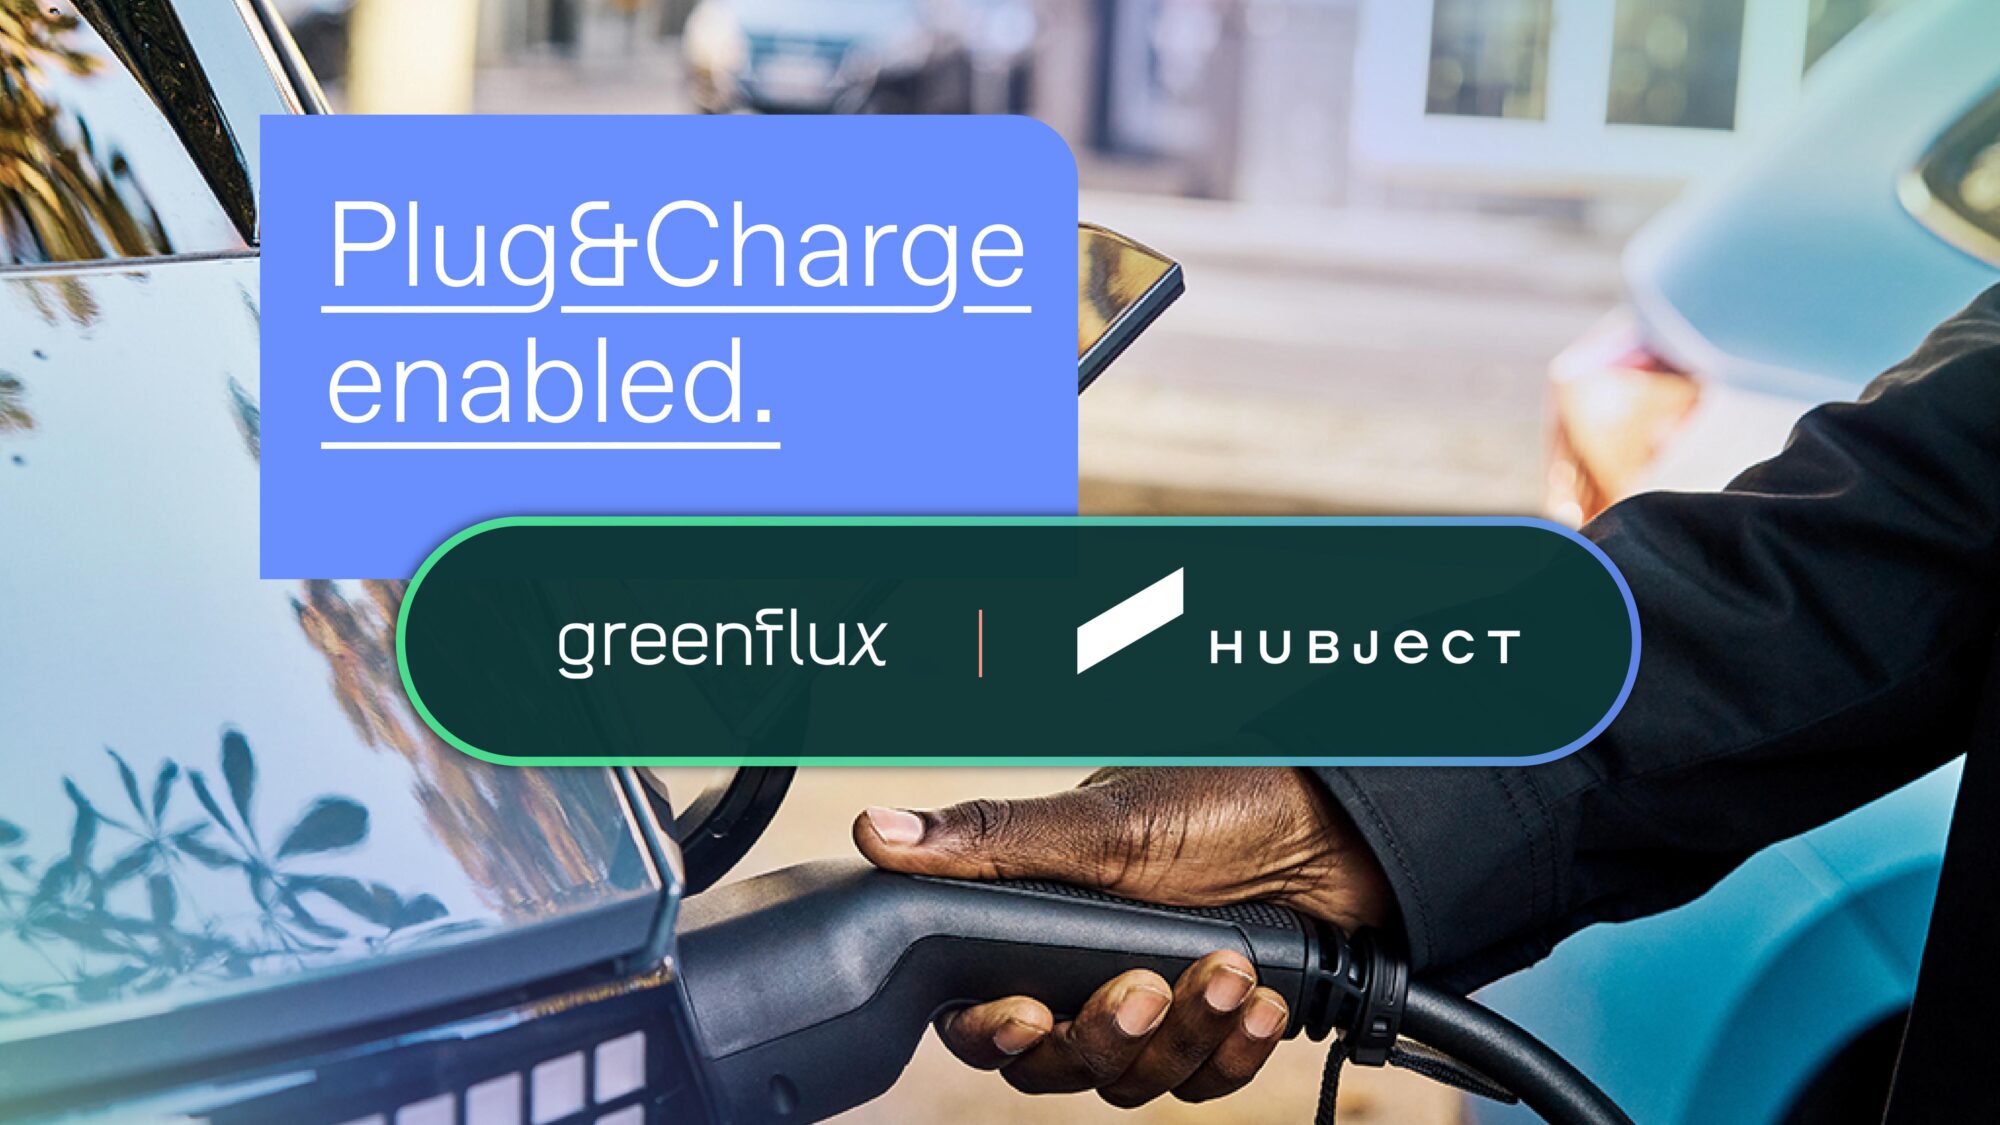 GreenFlux and Hubject partner to enable Plug&Charge